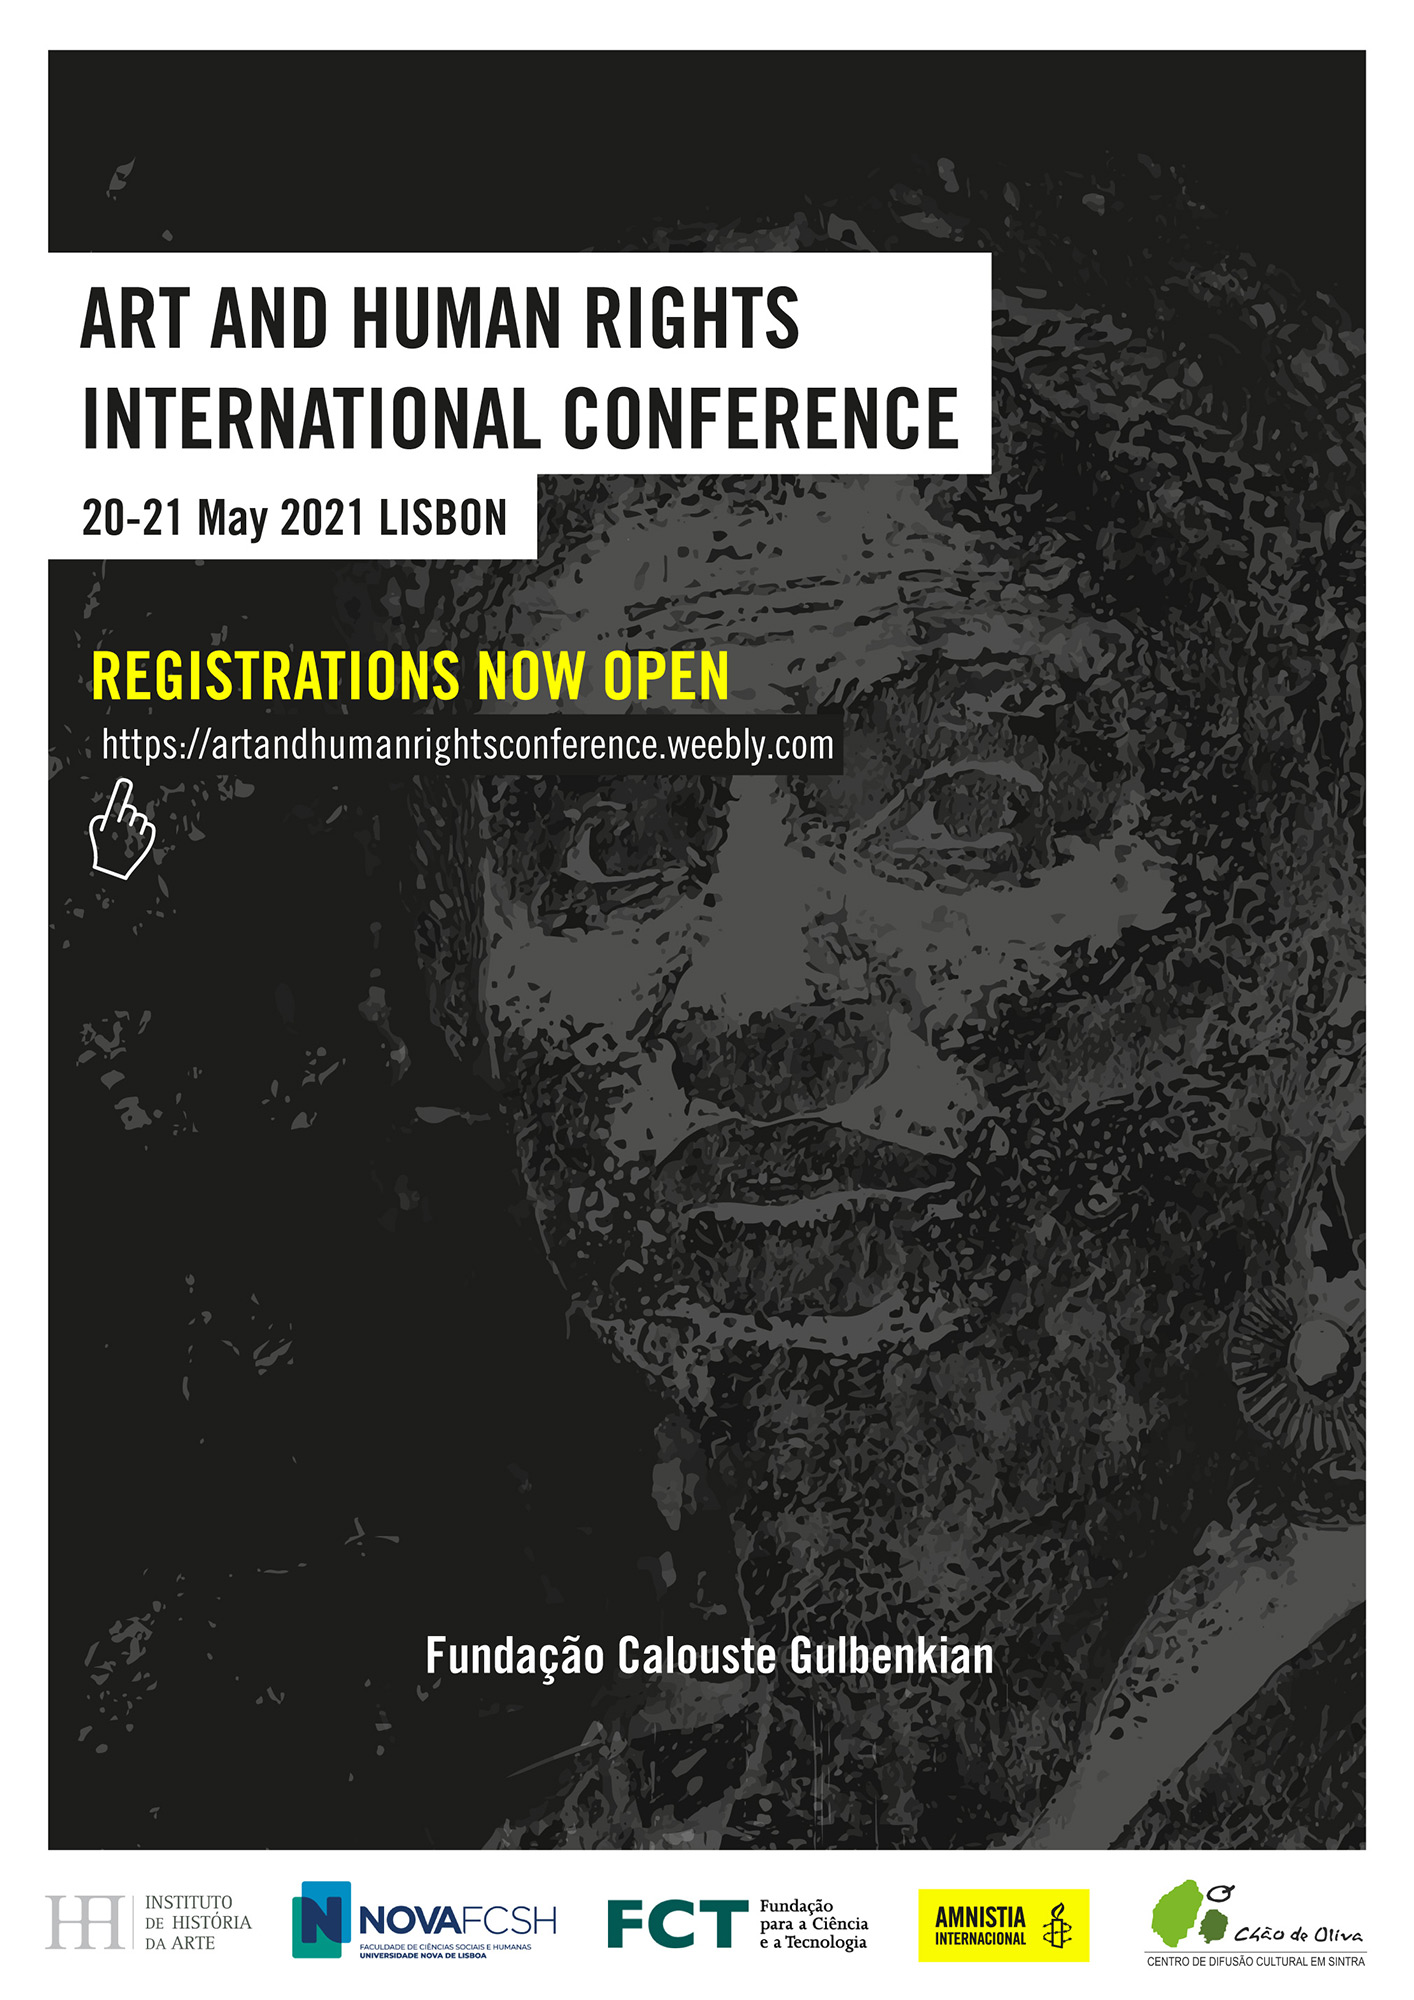 Art and Human Rights International Conference